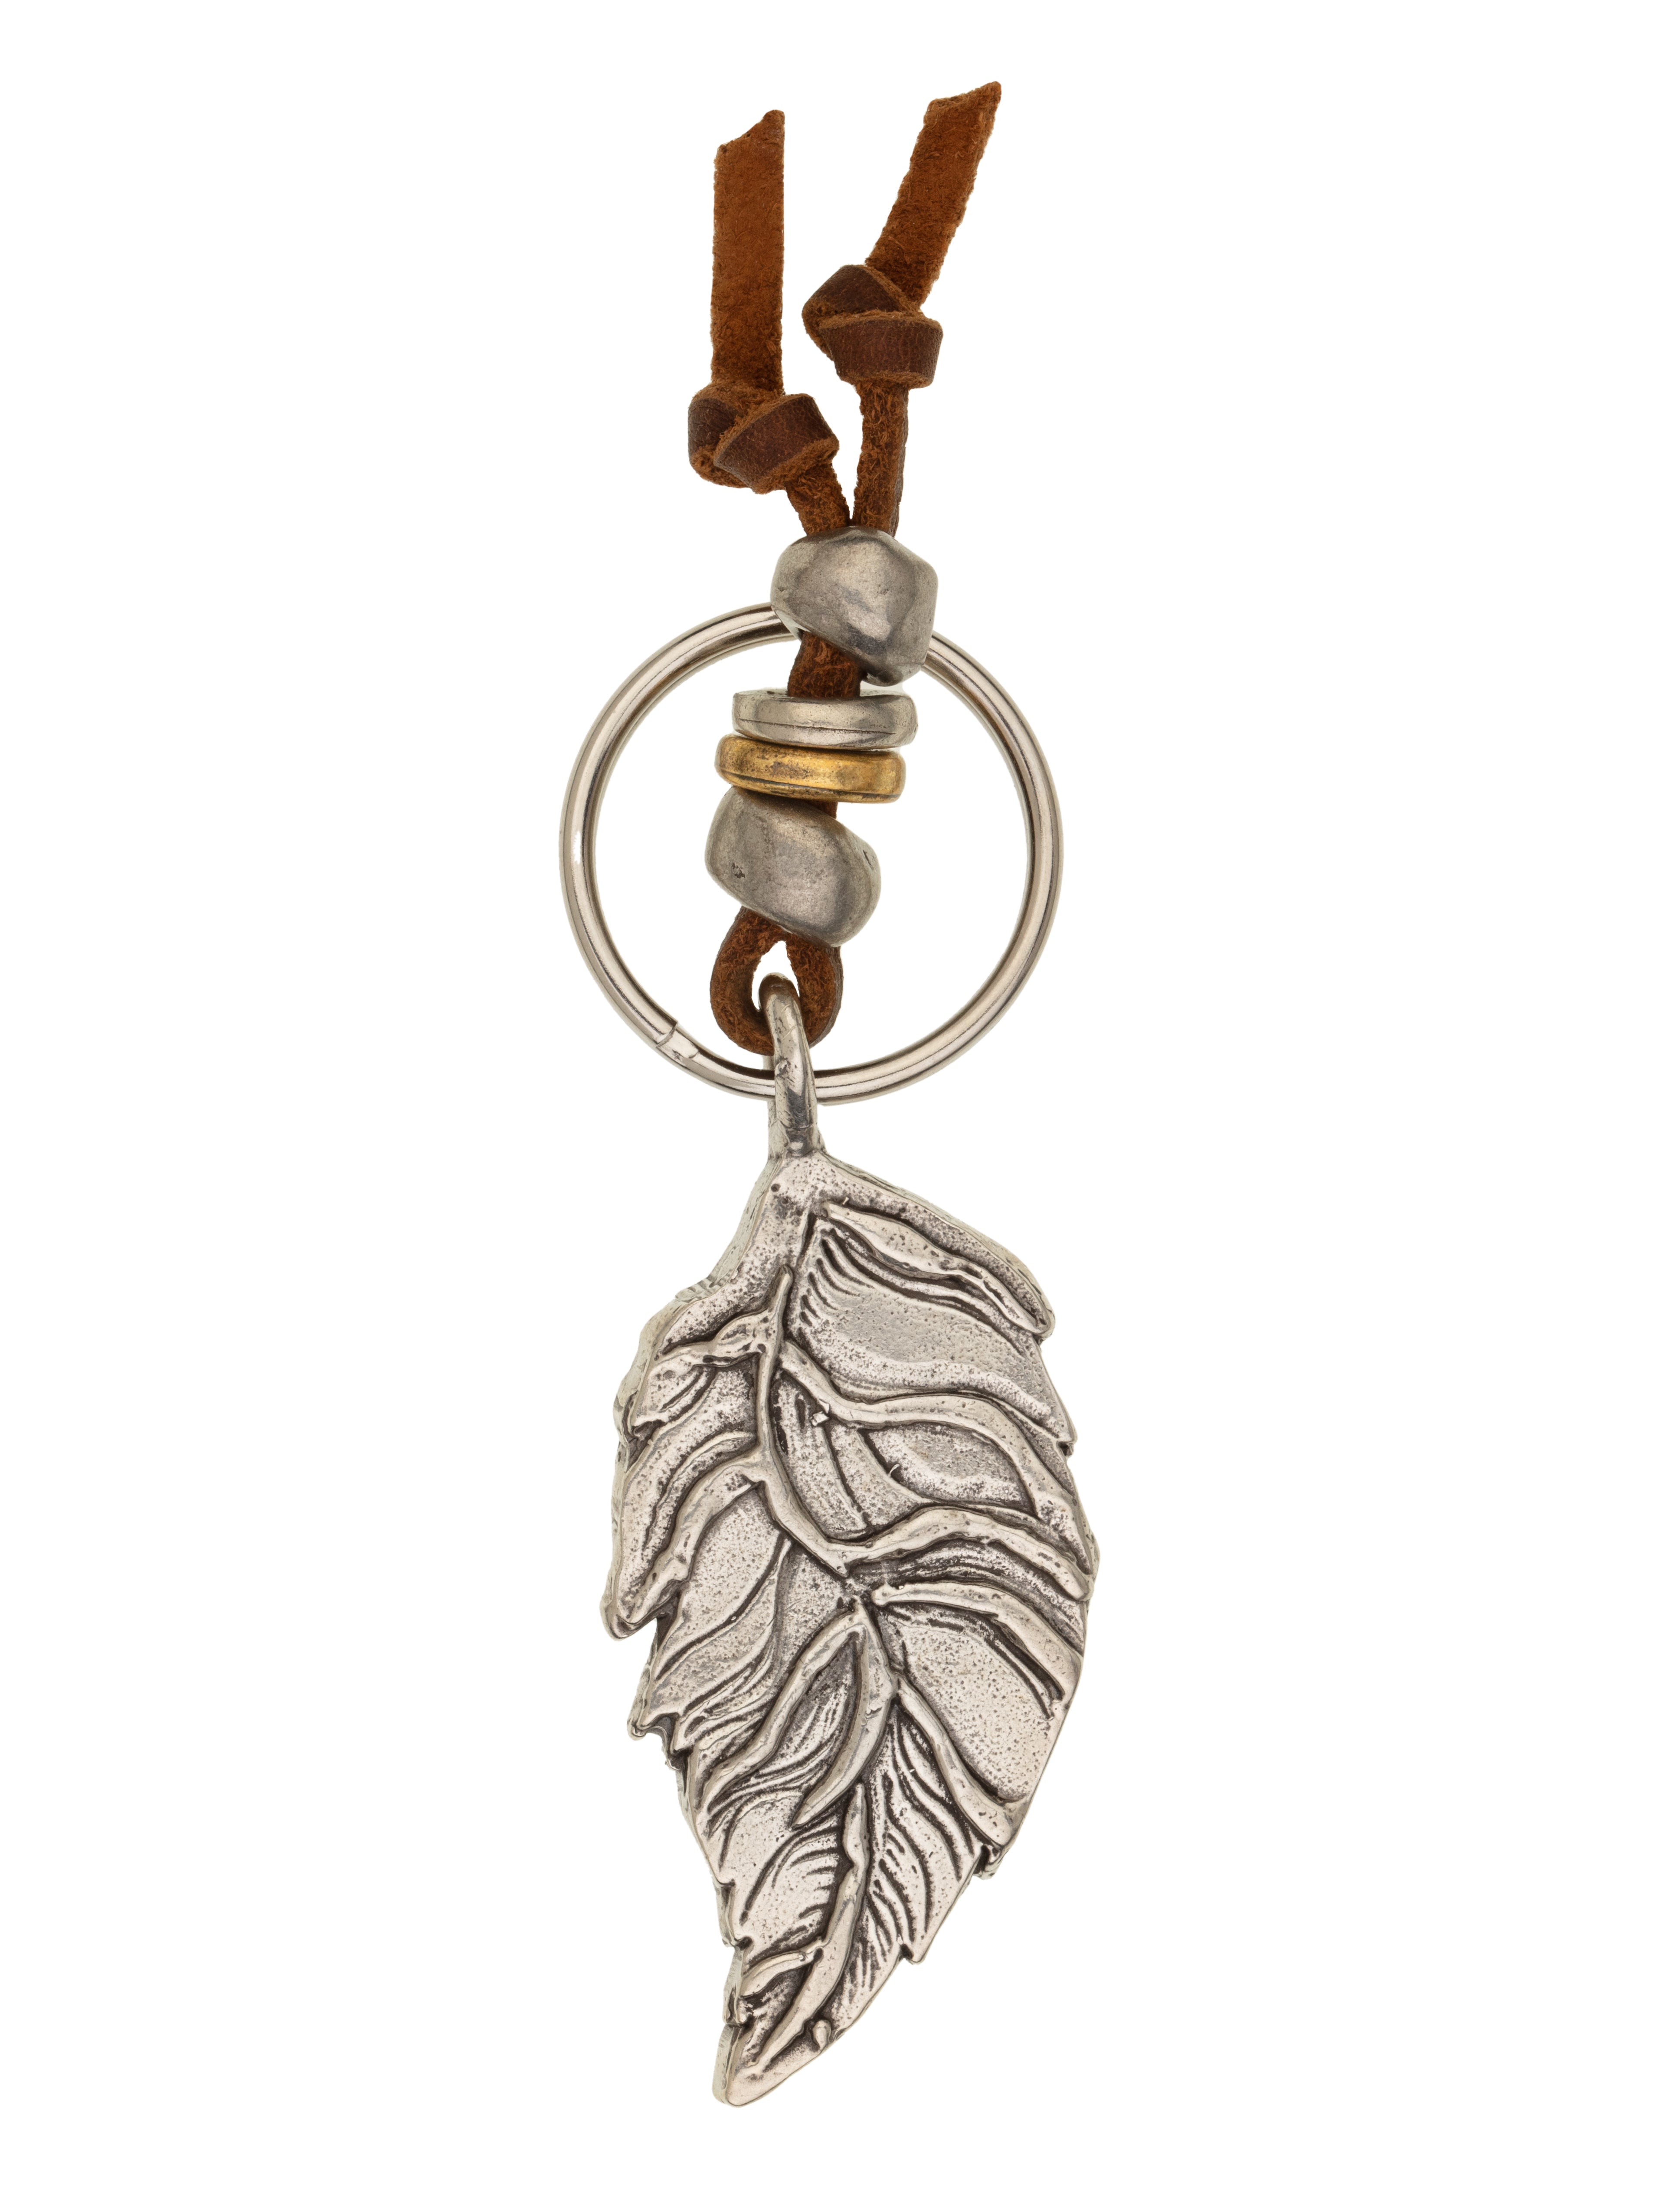 Leaf Of Protection Key Ring